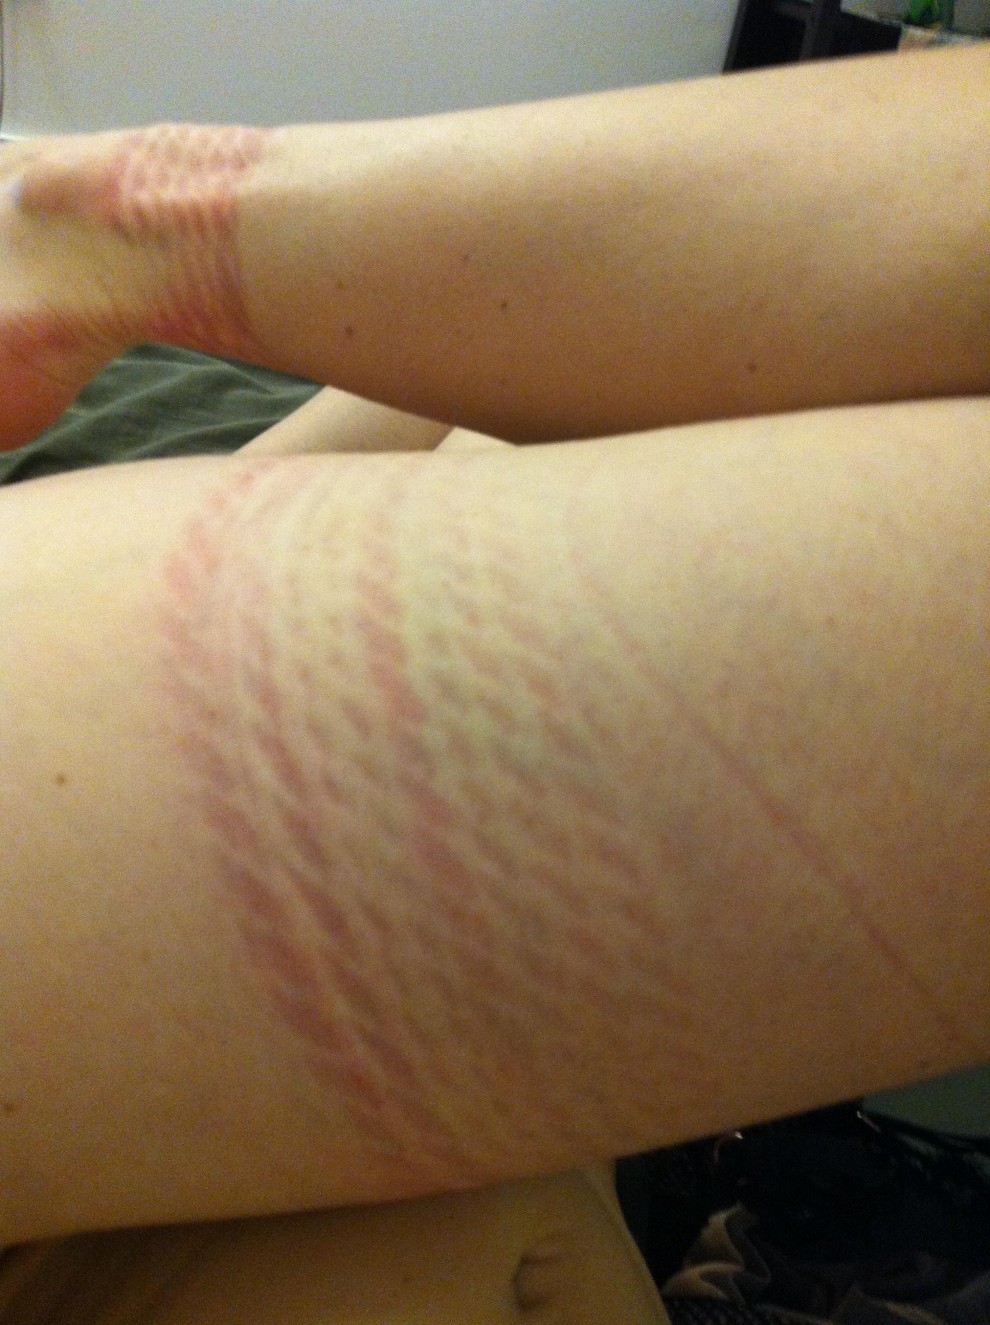 After playing by myself (f)